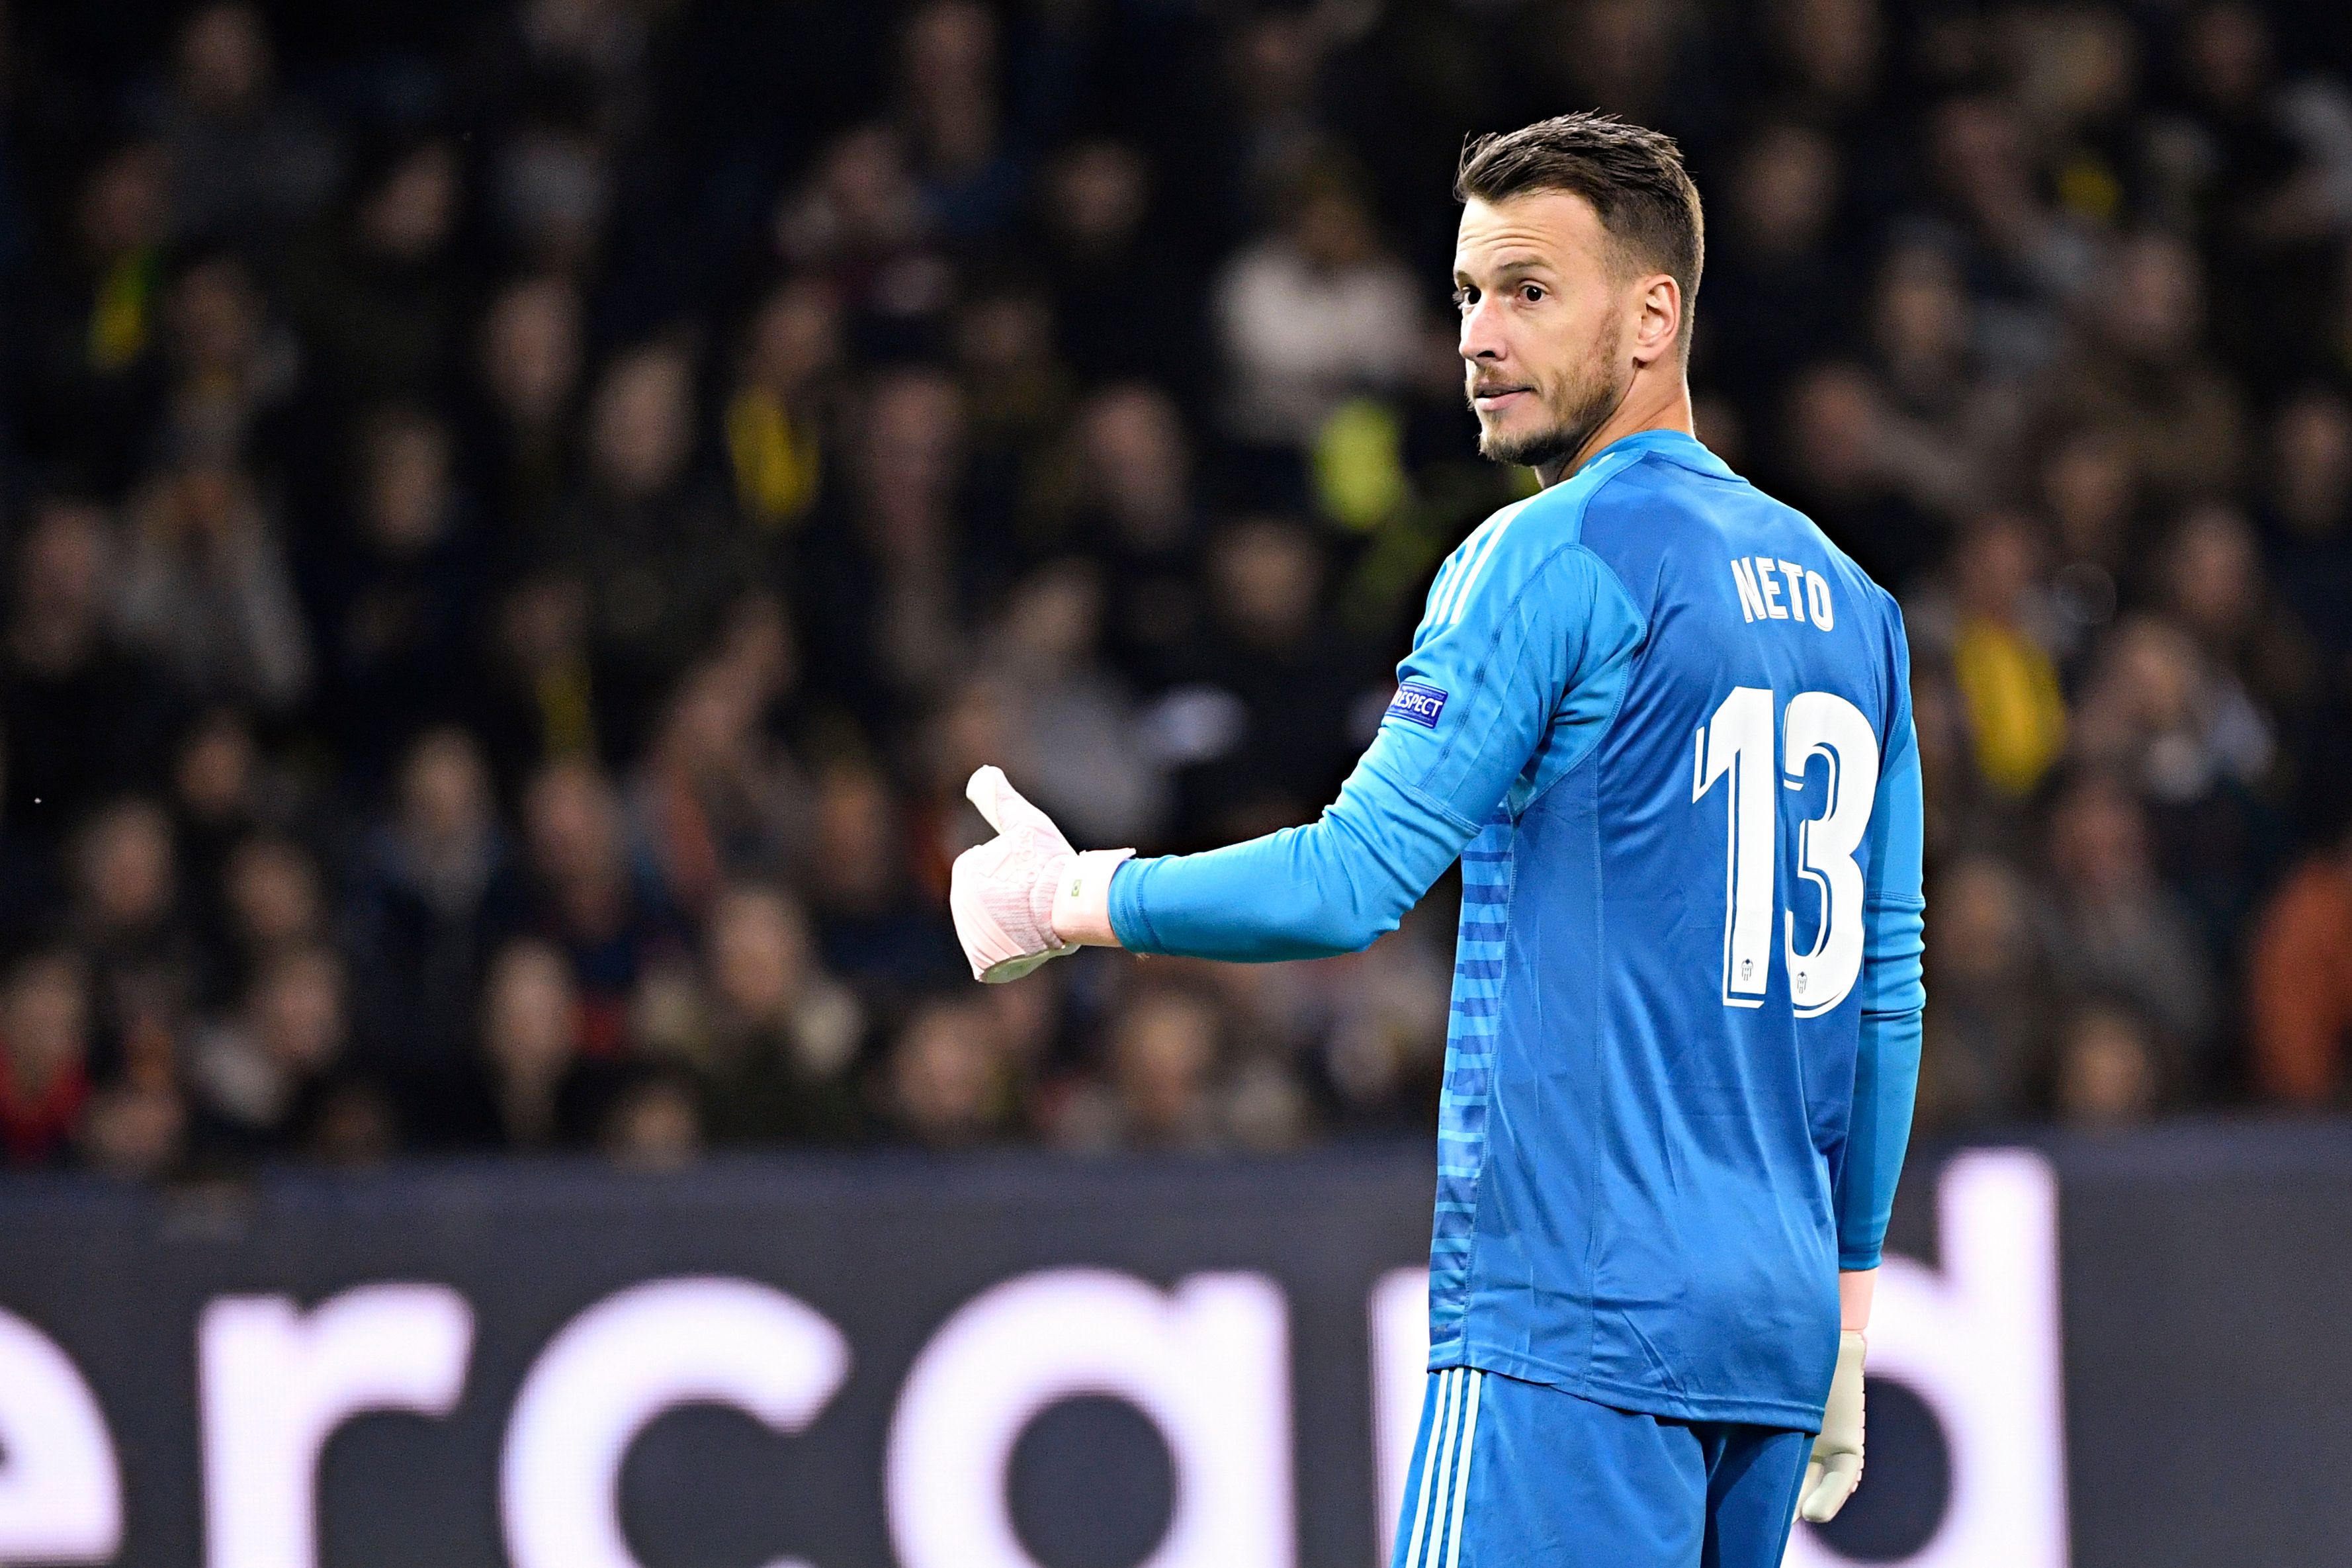 Neto to join Barcelona (Photo credit should read ALAIN GROSCLAUDE/AFP/Getty Images)